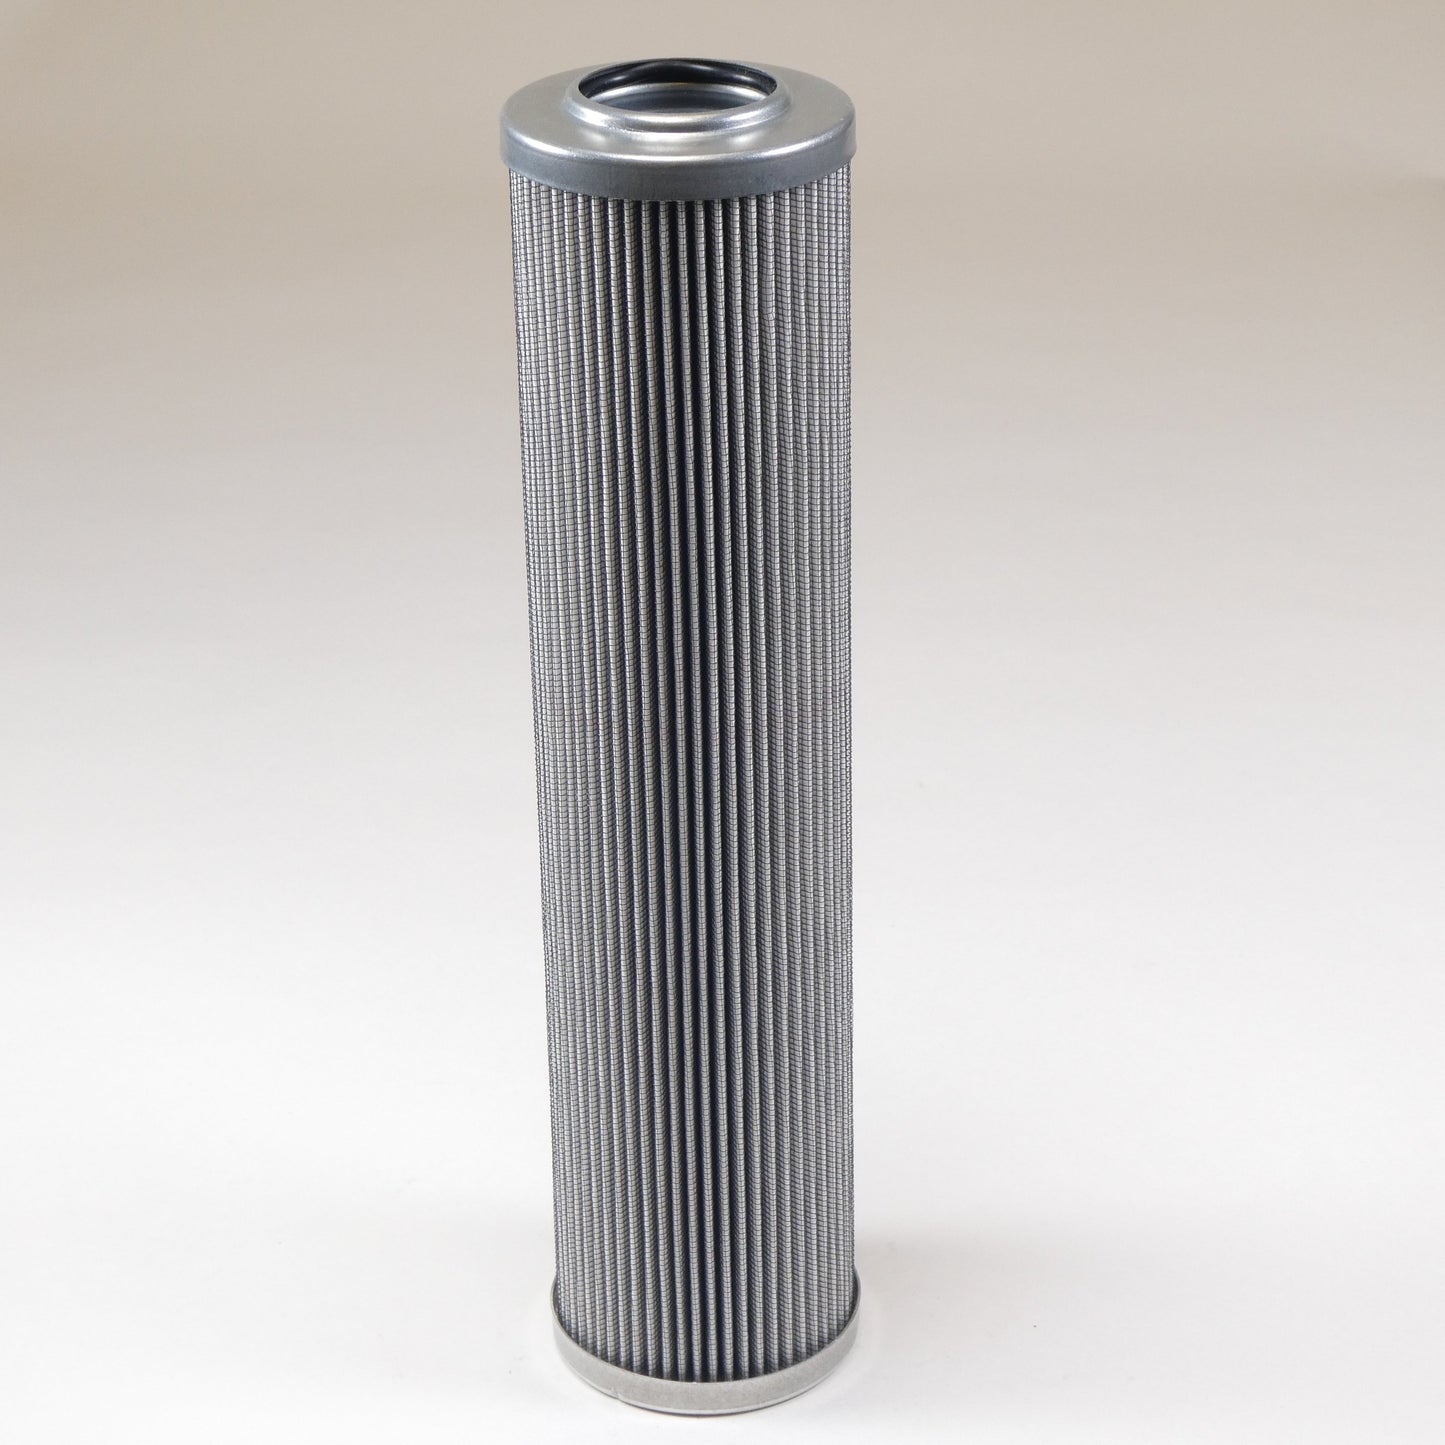 Hydrafil Replacement Filter Element for Diagnetics LPA313B03